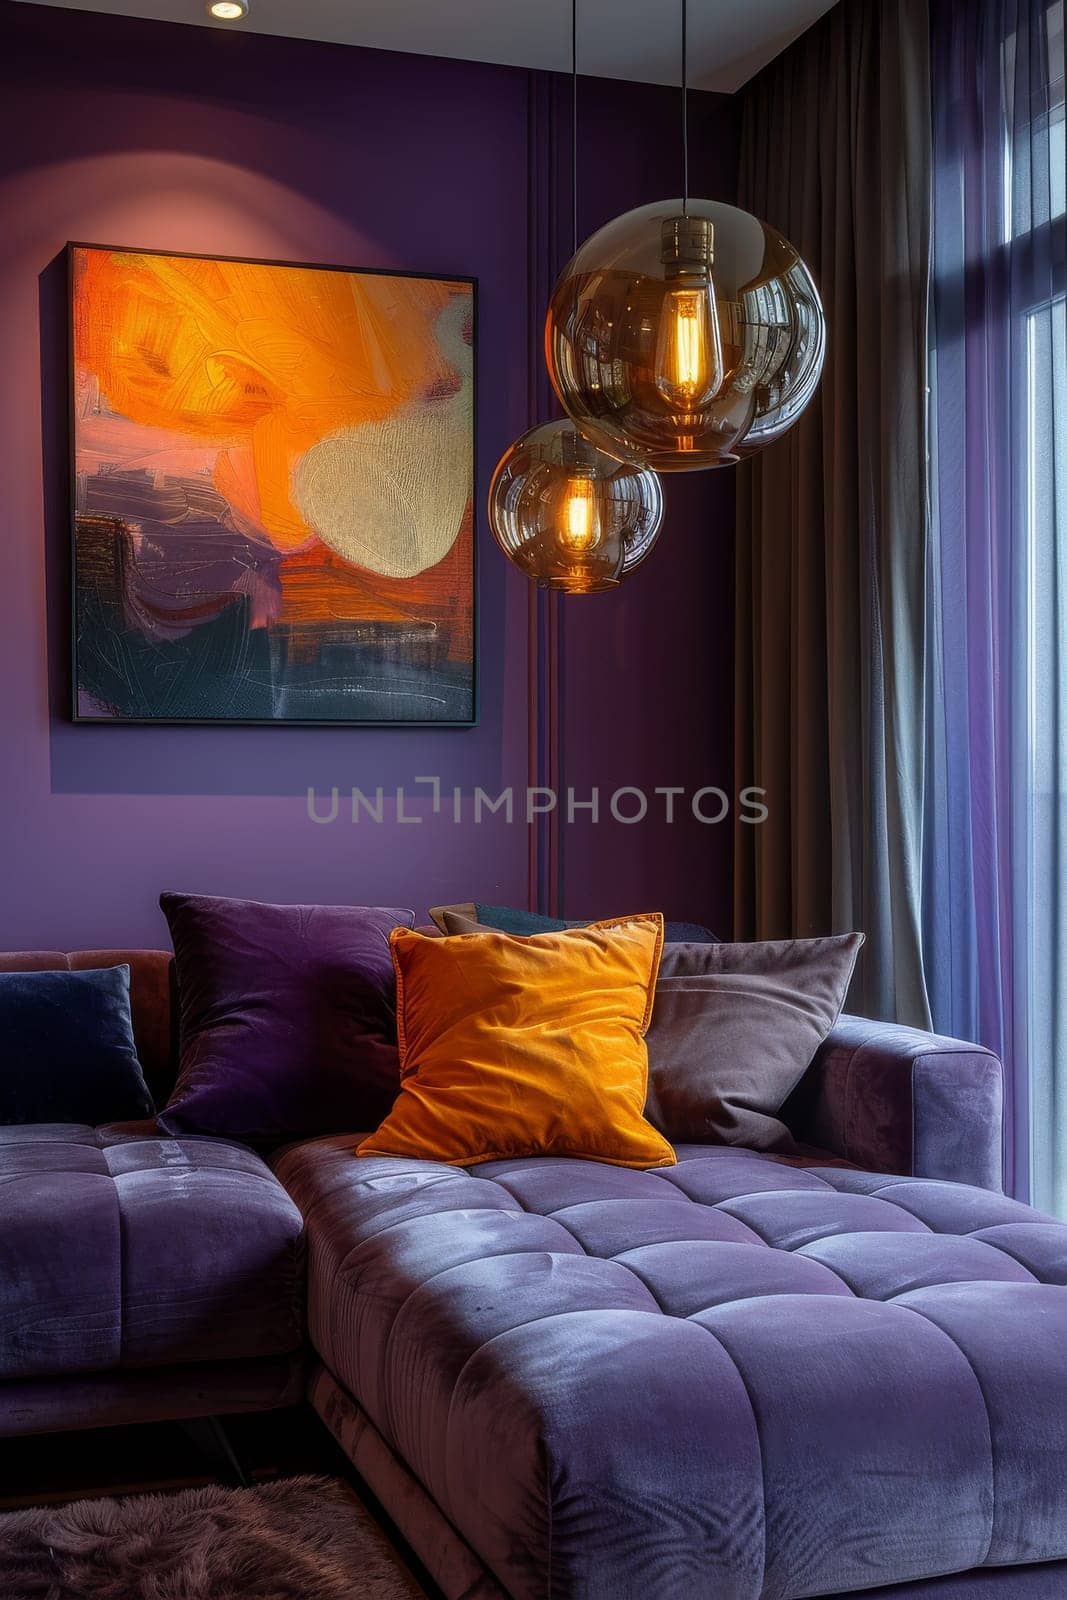 A purple couch with pillows and a painting on the wall by itchaznong